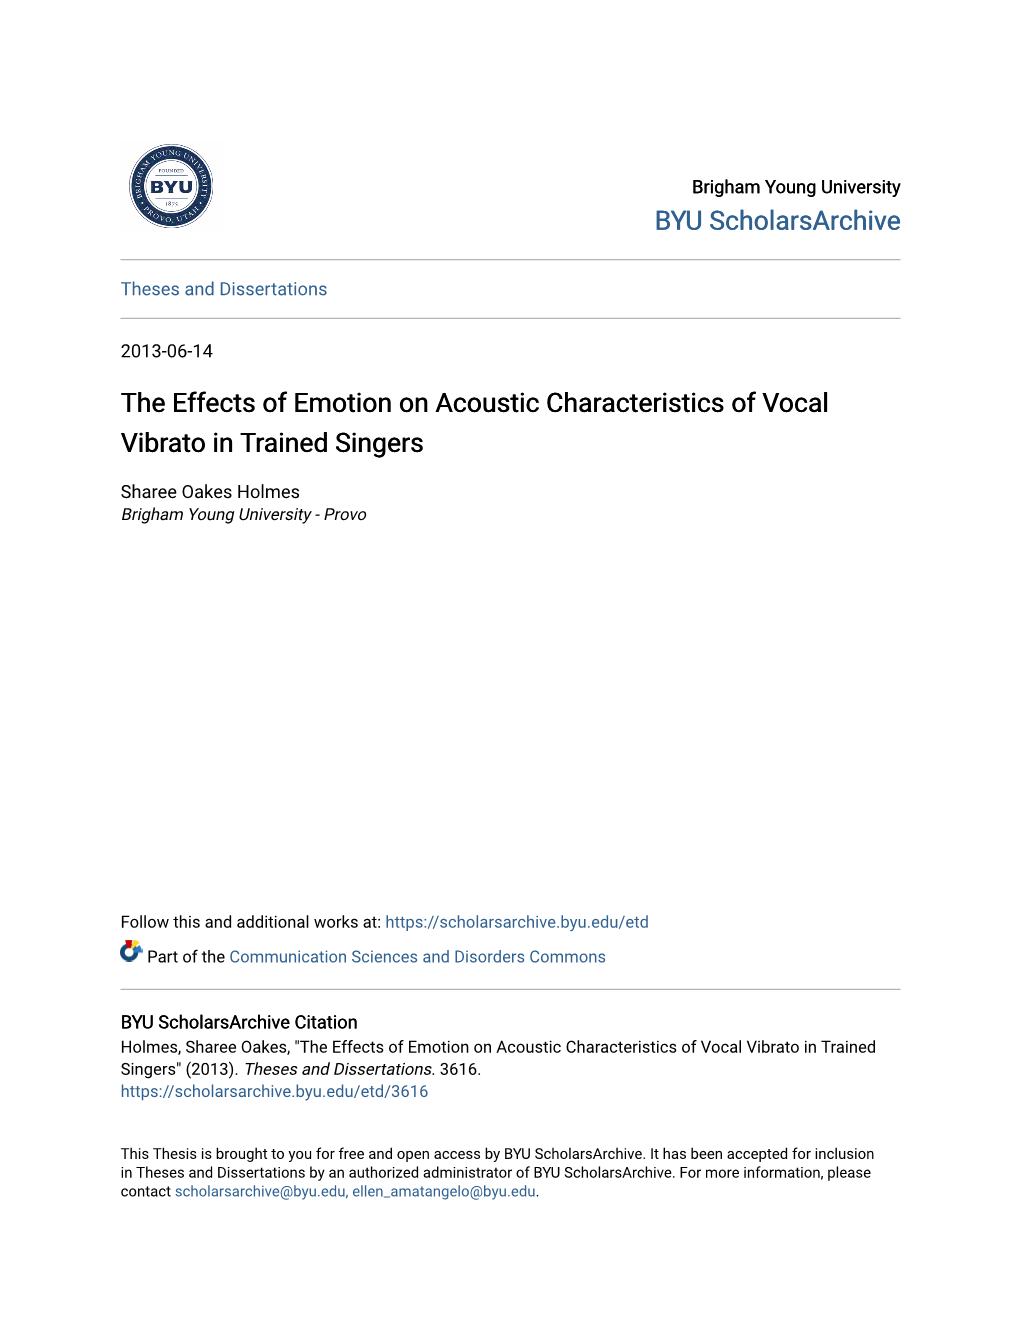 The Effects of Emotion on Acoustic Characteristics of Vocal Vibrato in Trained Singers